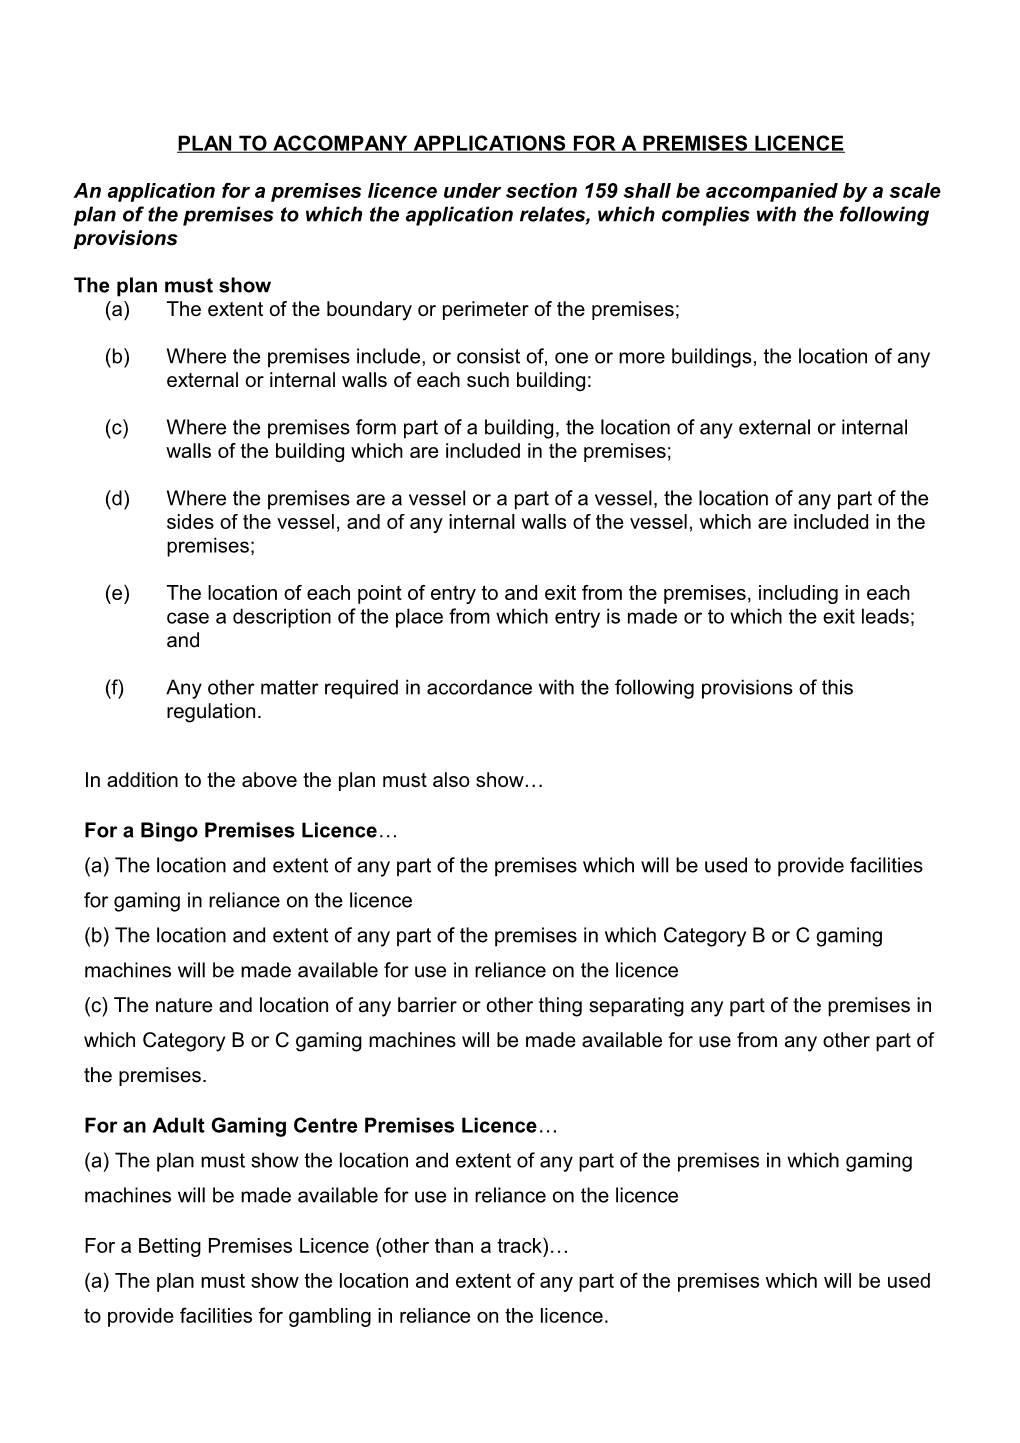 Plan to Accompany Applications for a Premises Licence